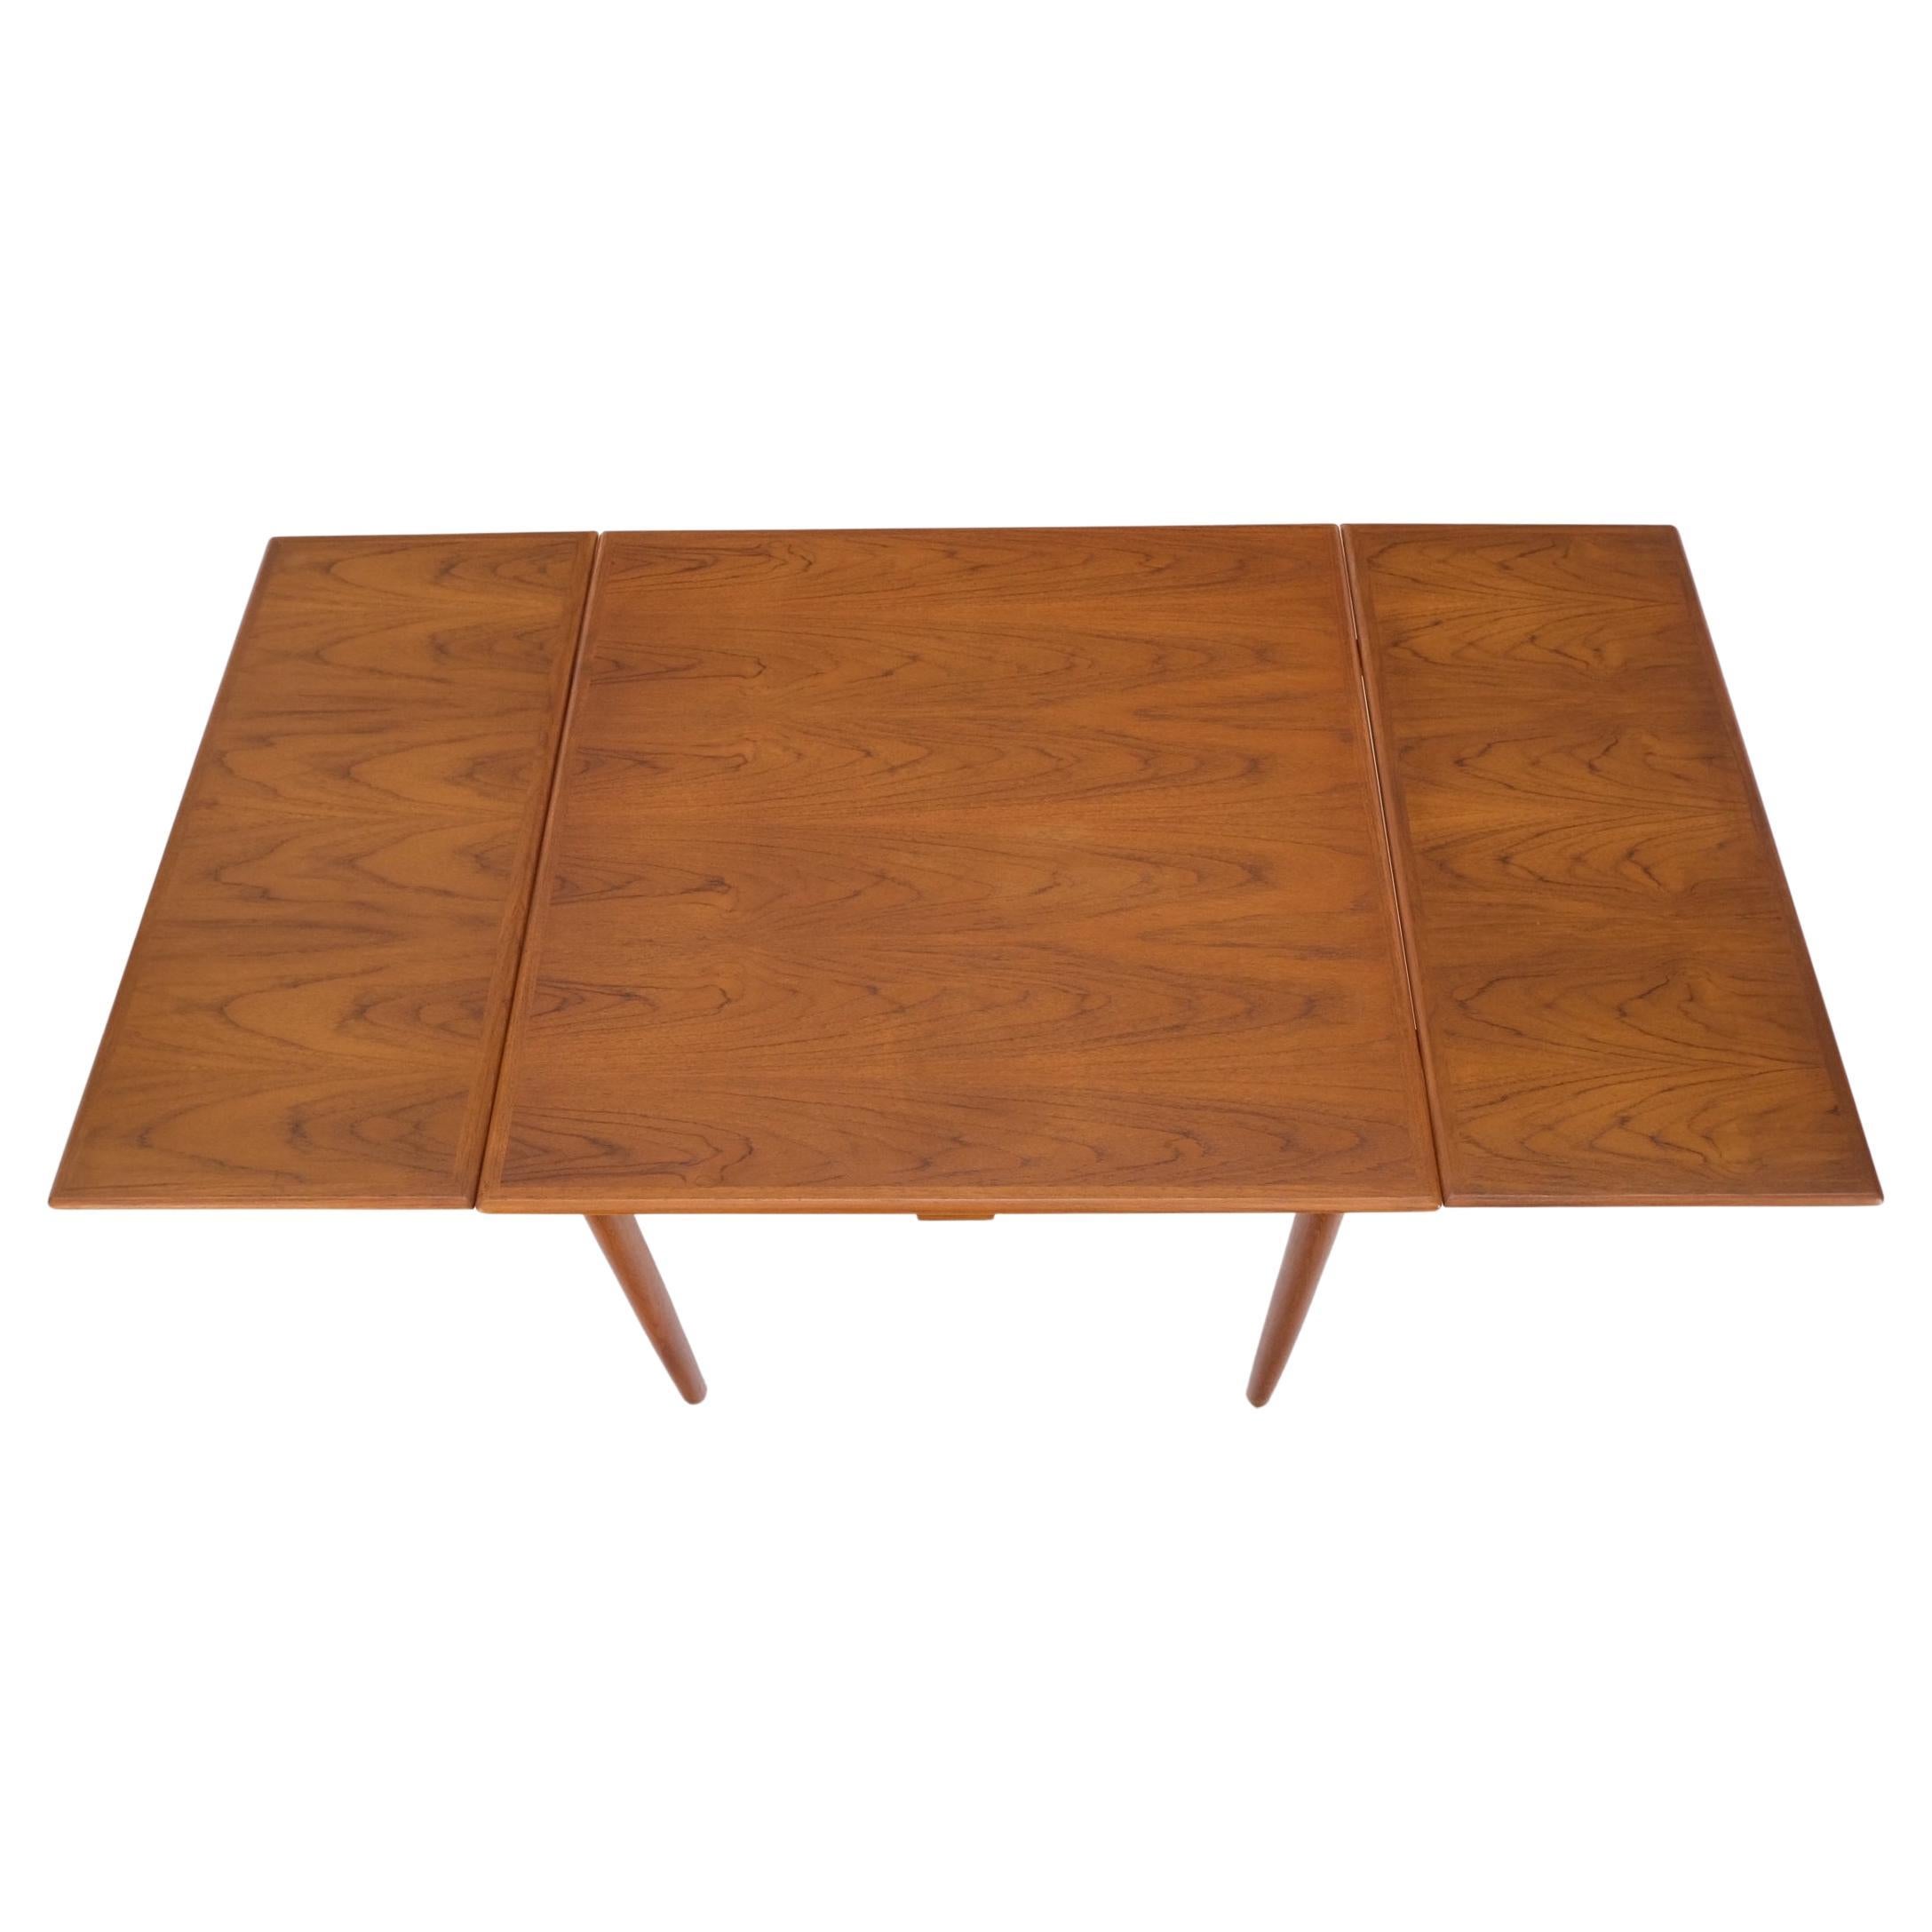 Danish Mid-Century Modern Square Teak Refectory Extension Boards Dining Table For Sale